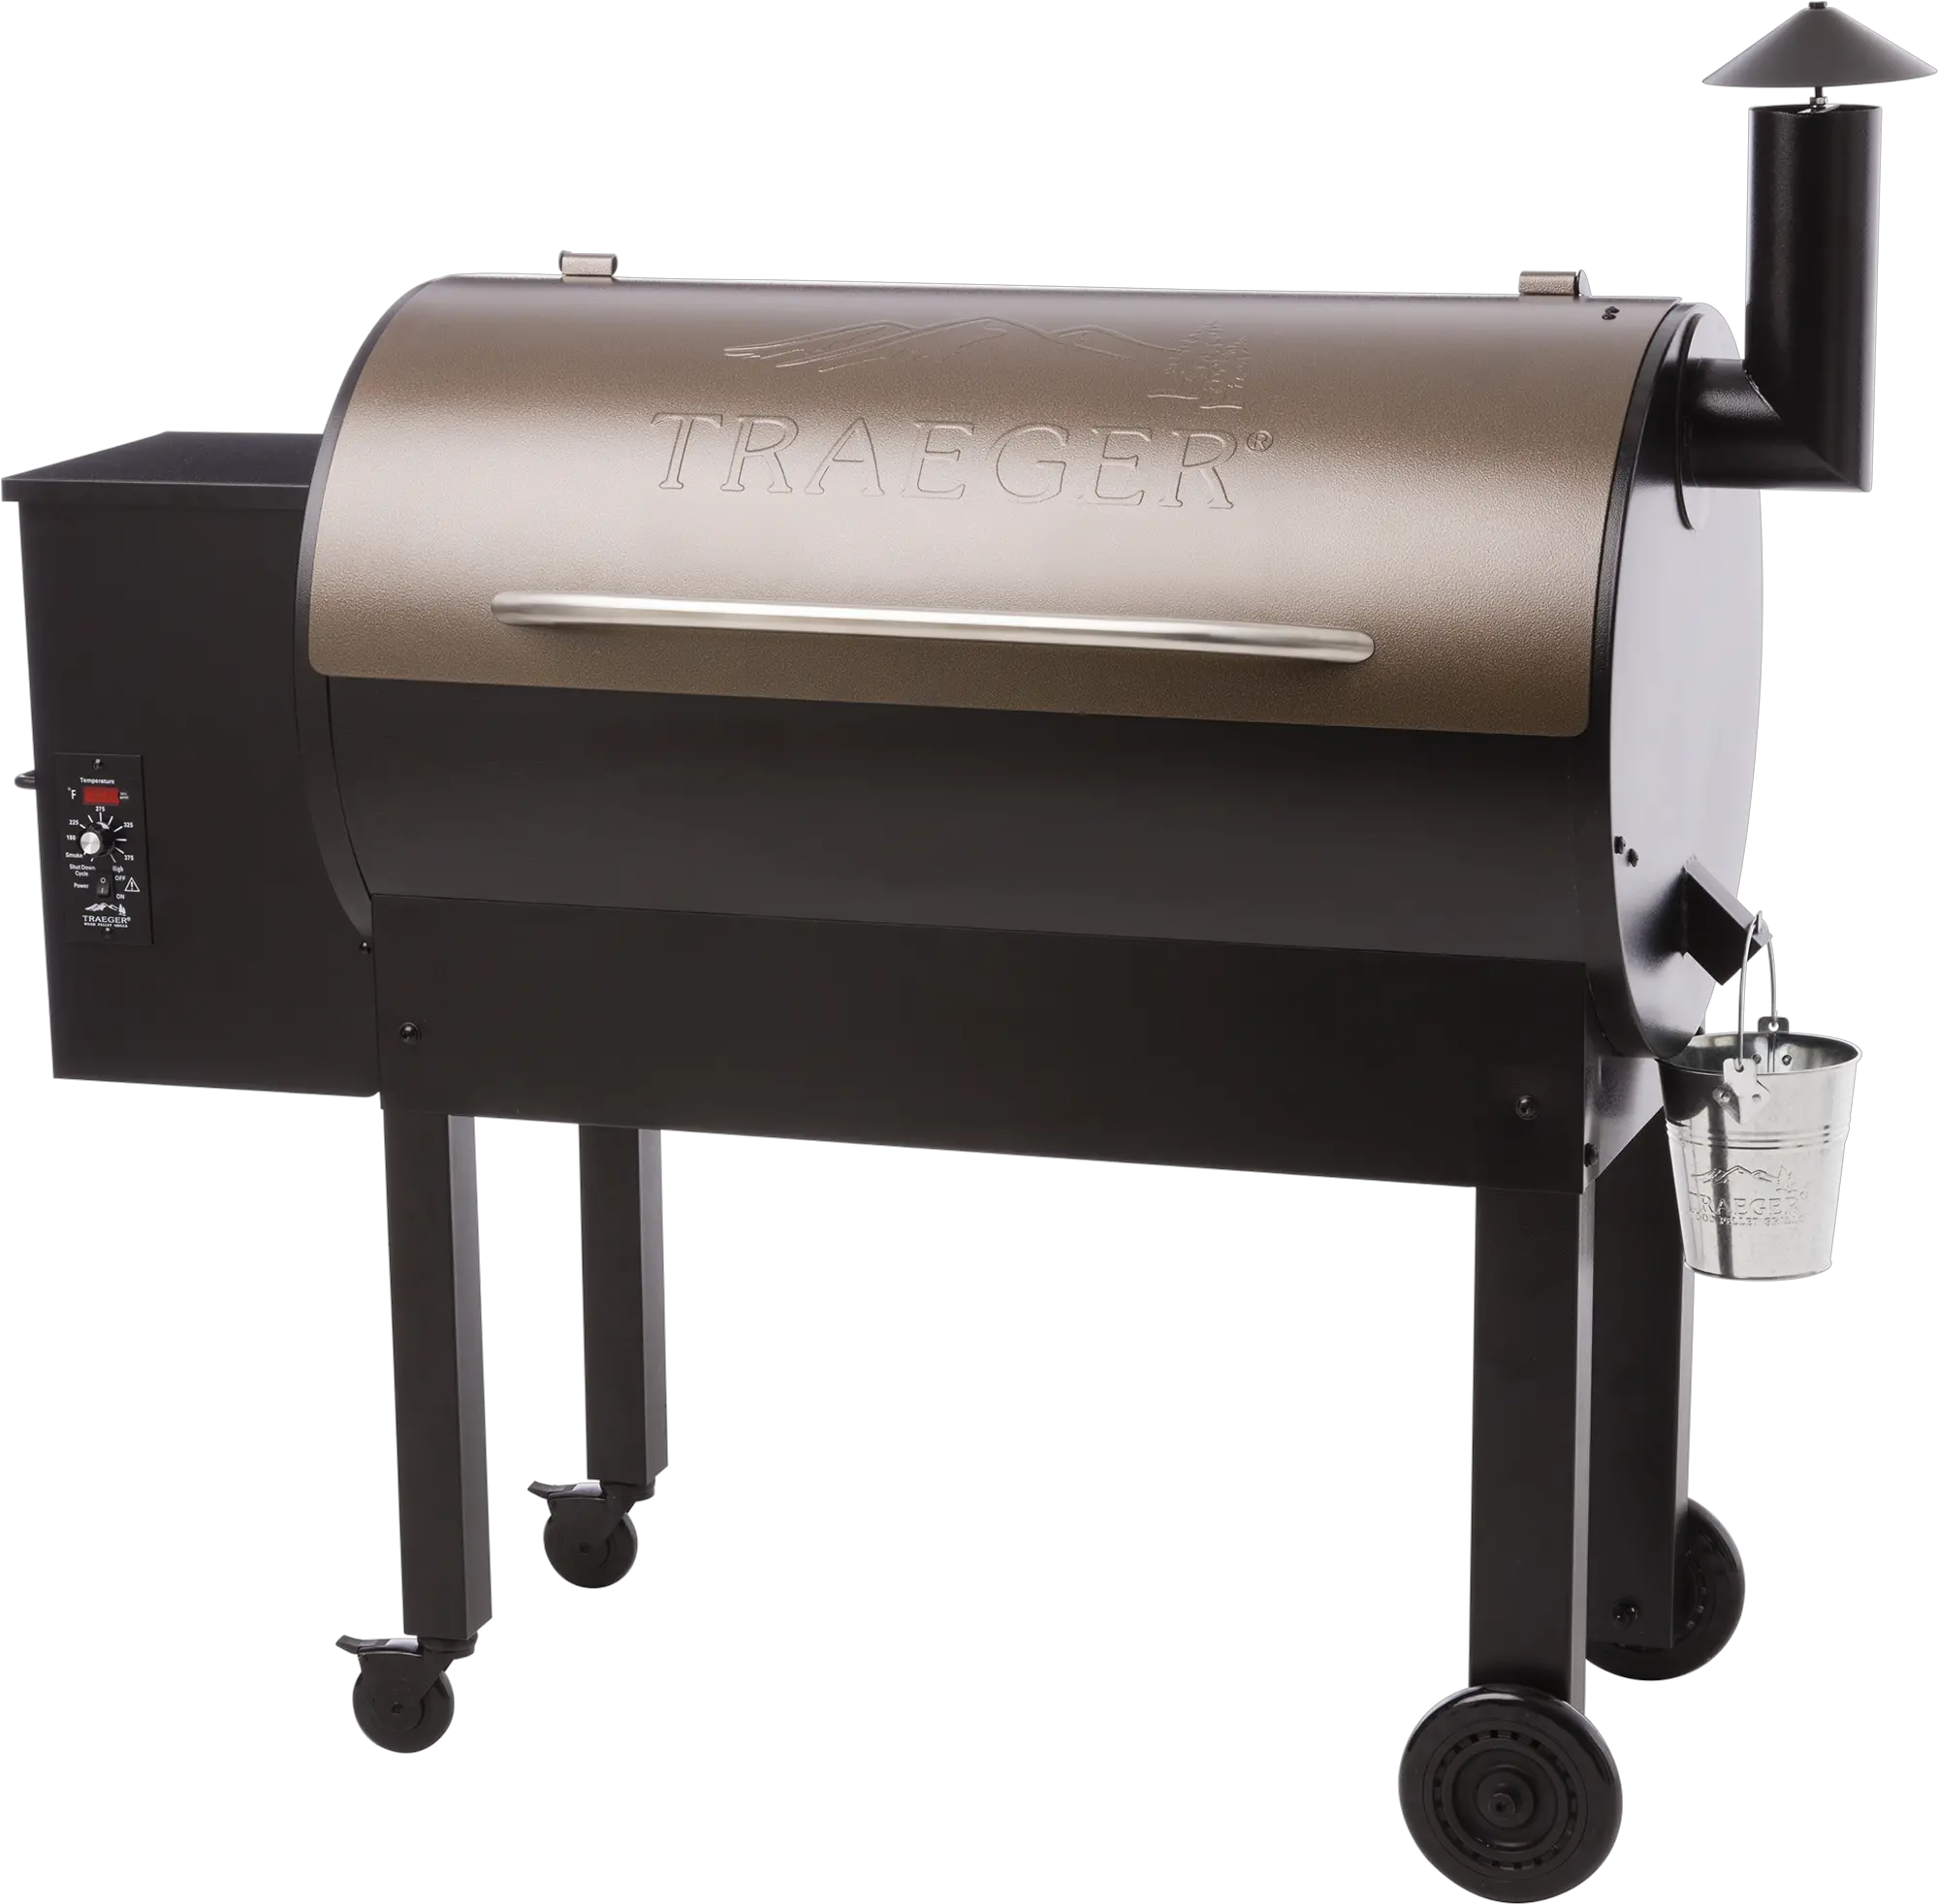 15 Traeger Grill Png For Free Download Texas Elite Pellet Grill 34 Bbq Grill Png